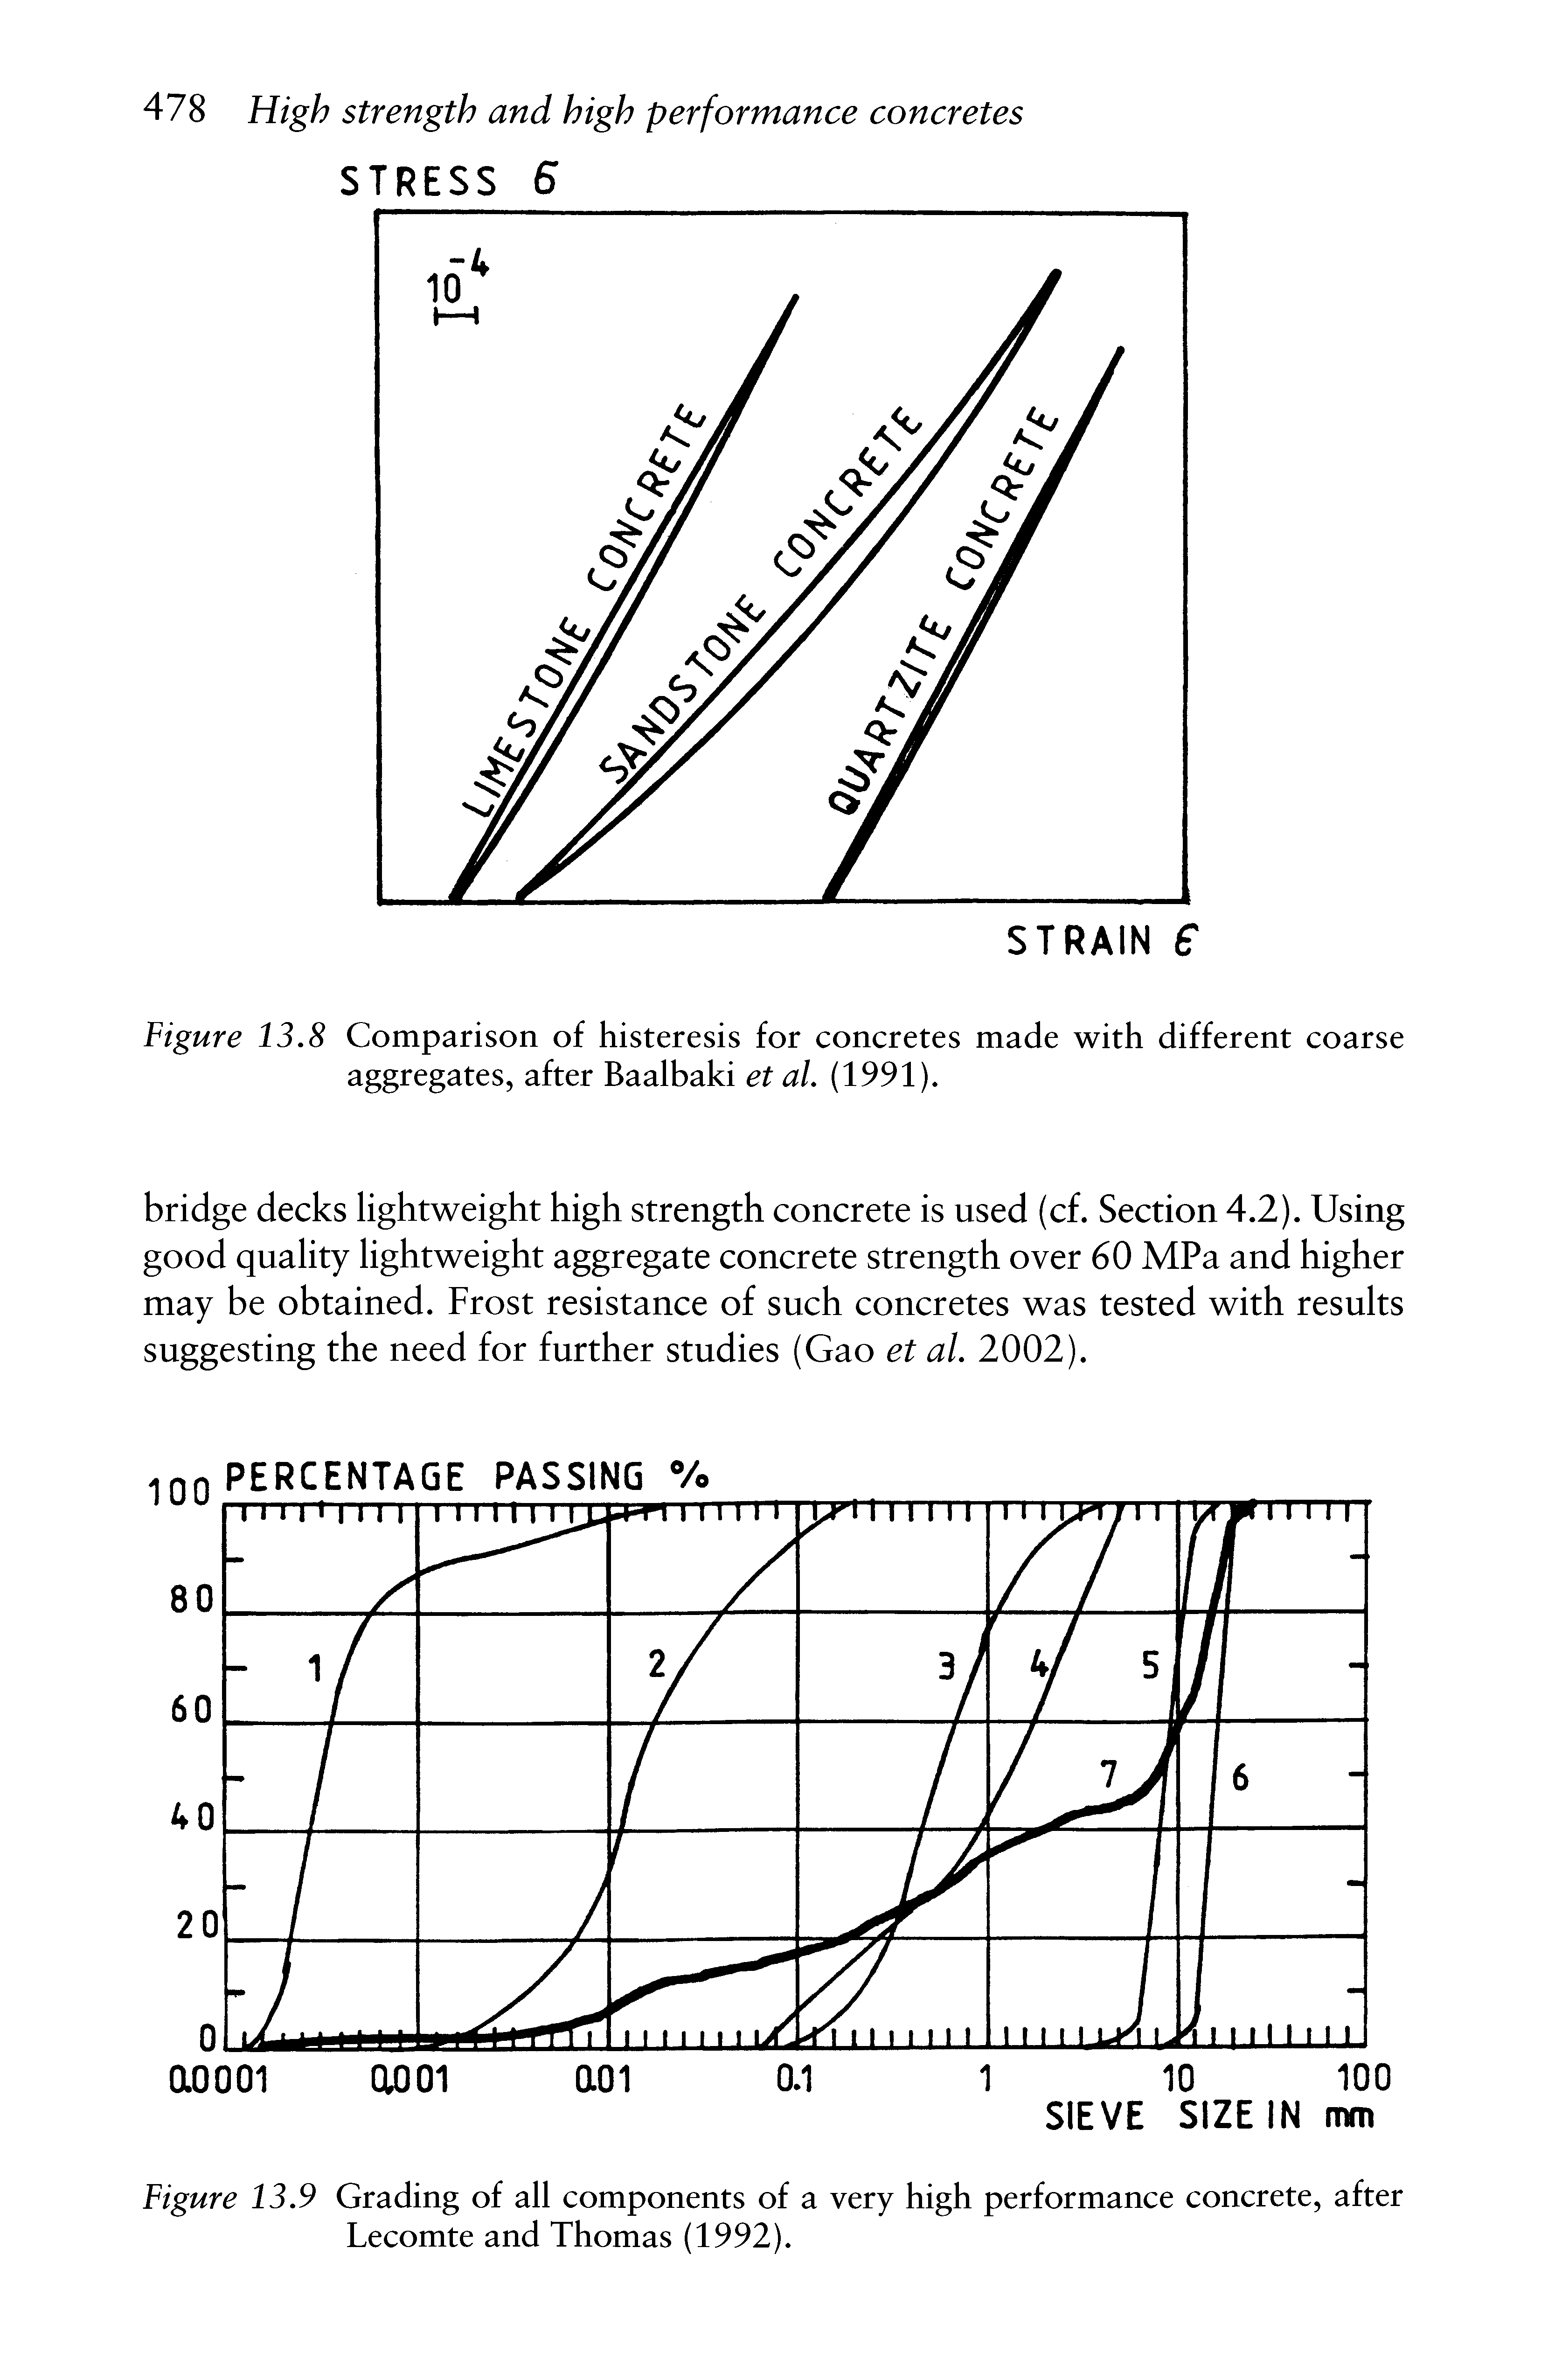 Figure 13.9 Grading of all components of a very high performance concrete, after Lecomte and Thomas (1992).